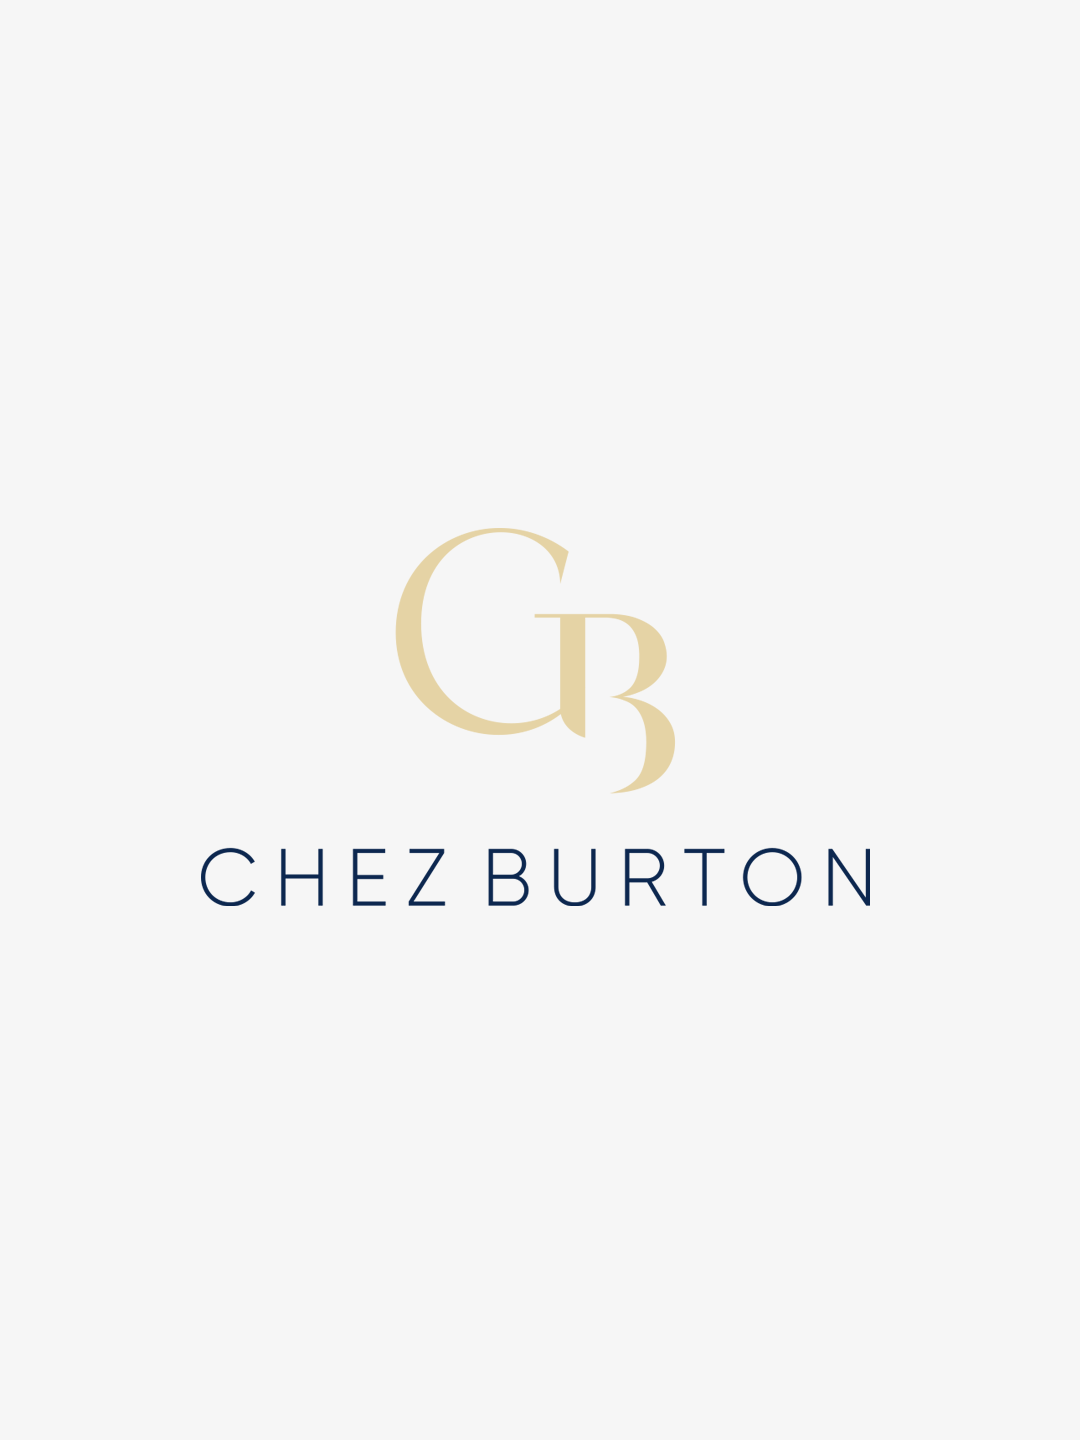 Chez Burton logo design in gold and navy blue over an off-white background.